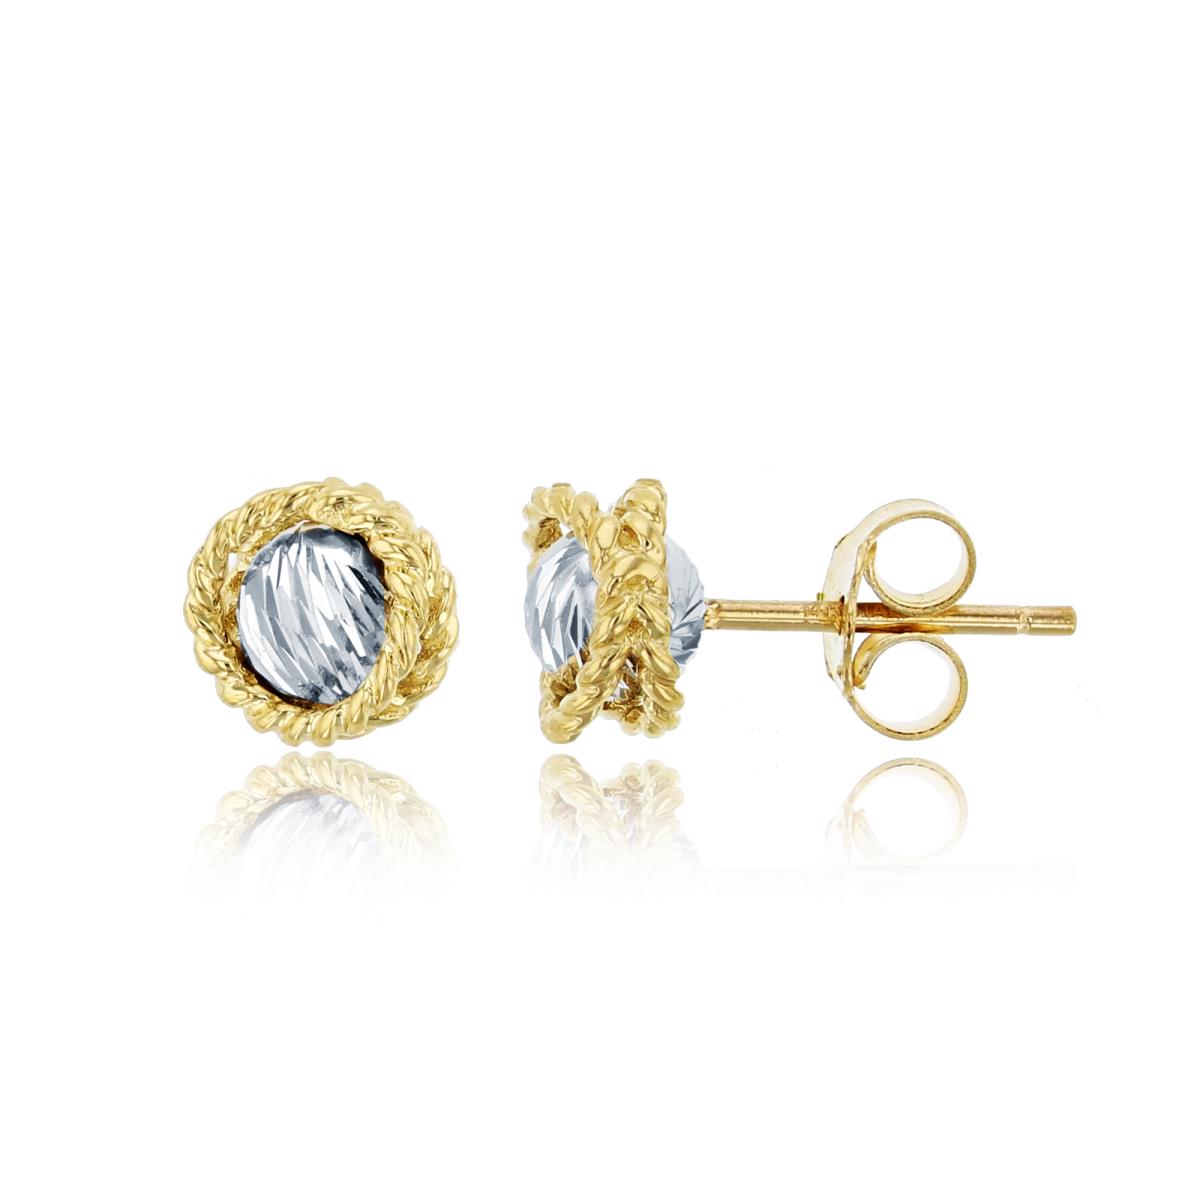 14K Yellow & White Gold Textured Ball in Circle Stud Earring